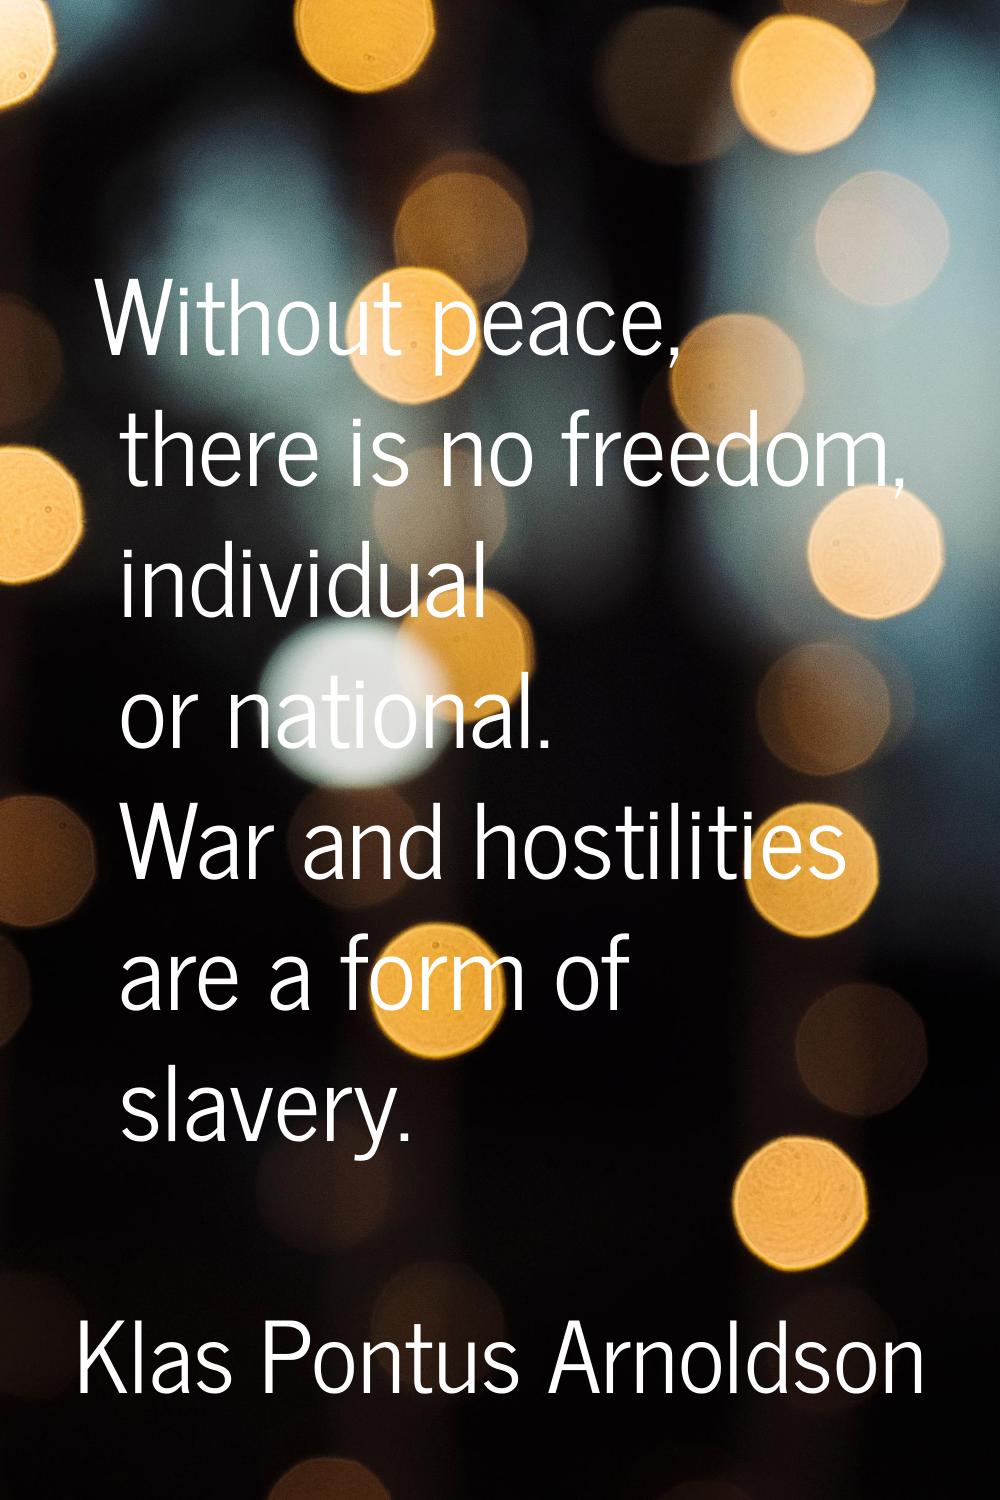 Without peace, there is no freedom, individual or national. War and hostilities are a form of slave